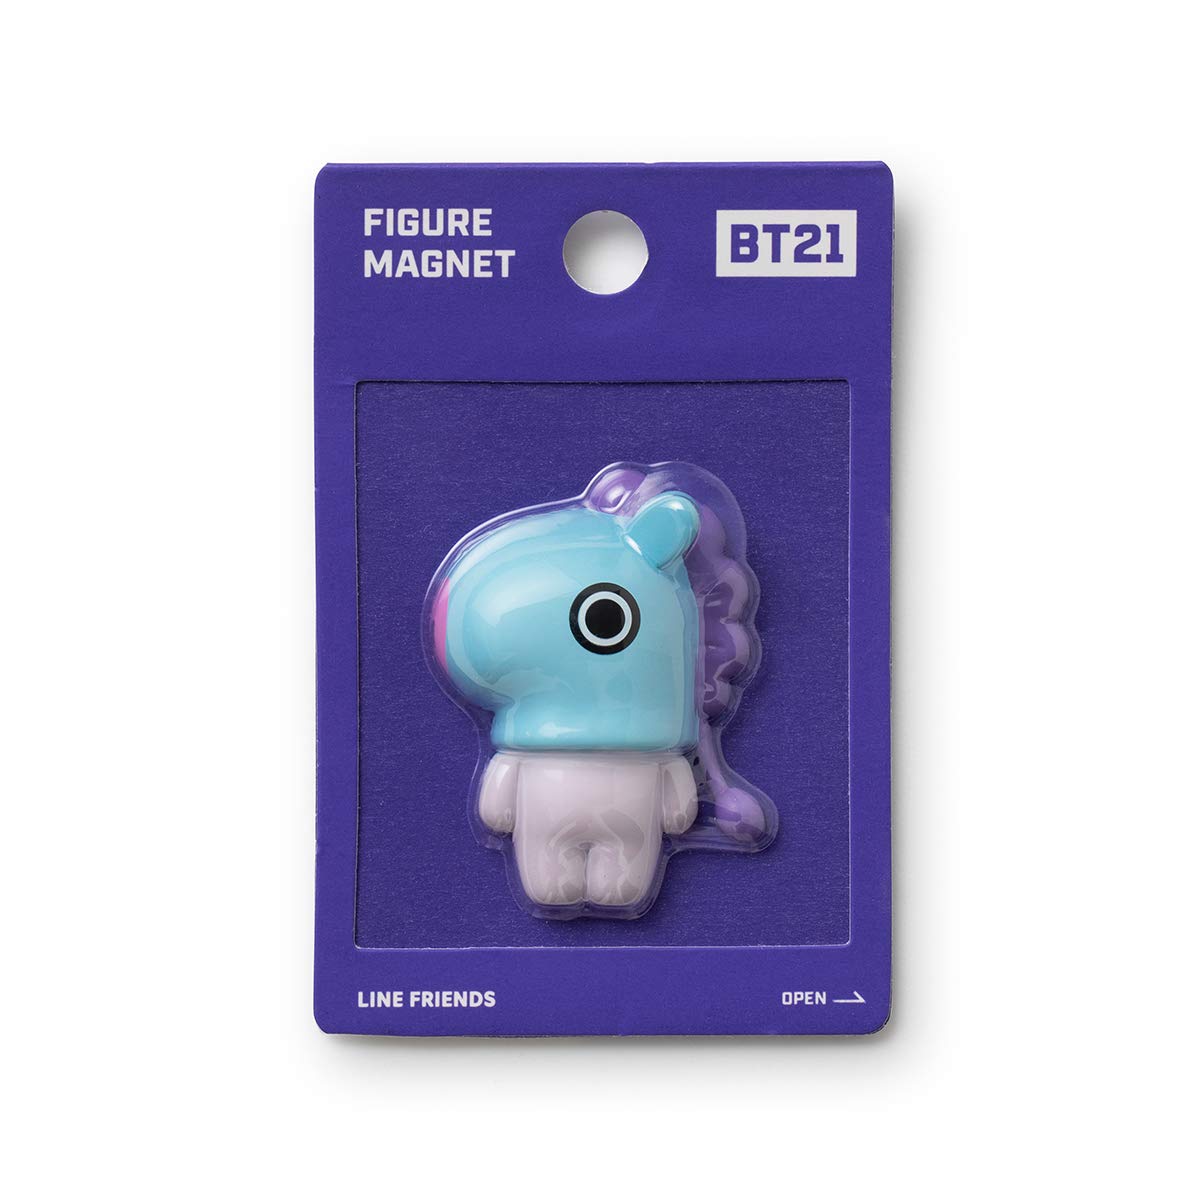 [BTS] BT21 Character Small Toy Figure Magnet COOKY, KOYA, MANG - Refrigerator Fridge Whiteboard Magnet for Kitchen and Office